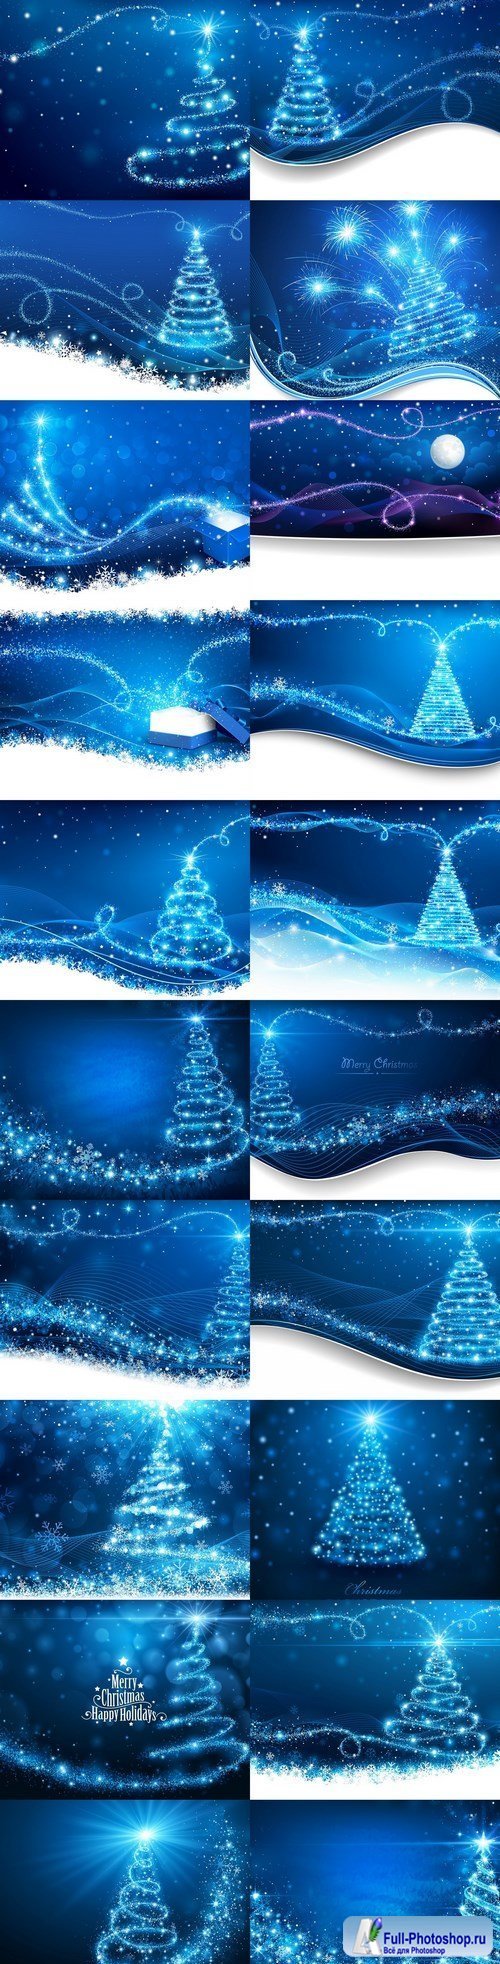 Blue Christmas Backgrounds 20xEPS